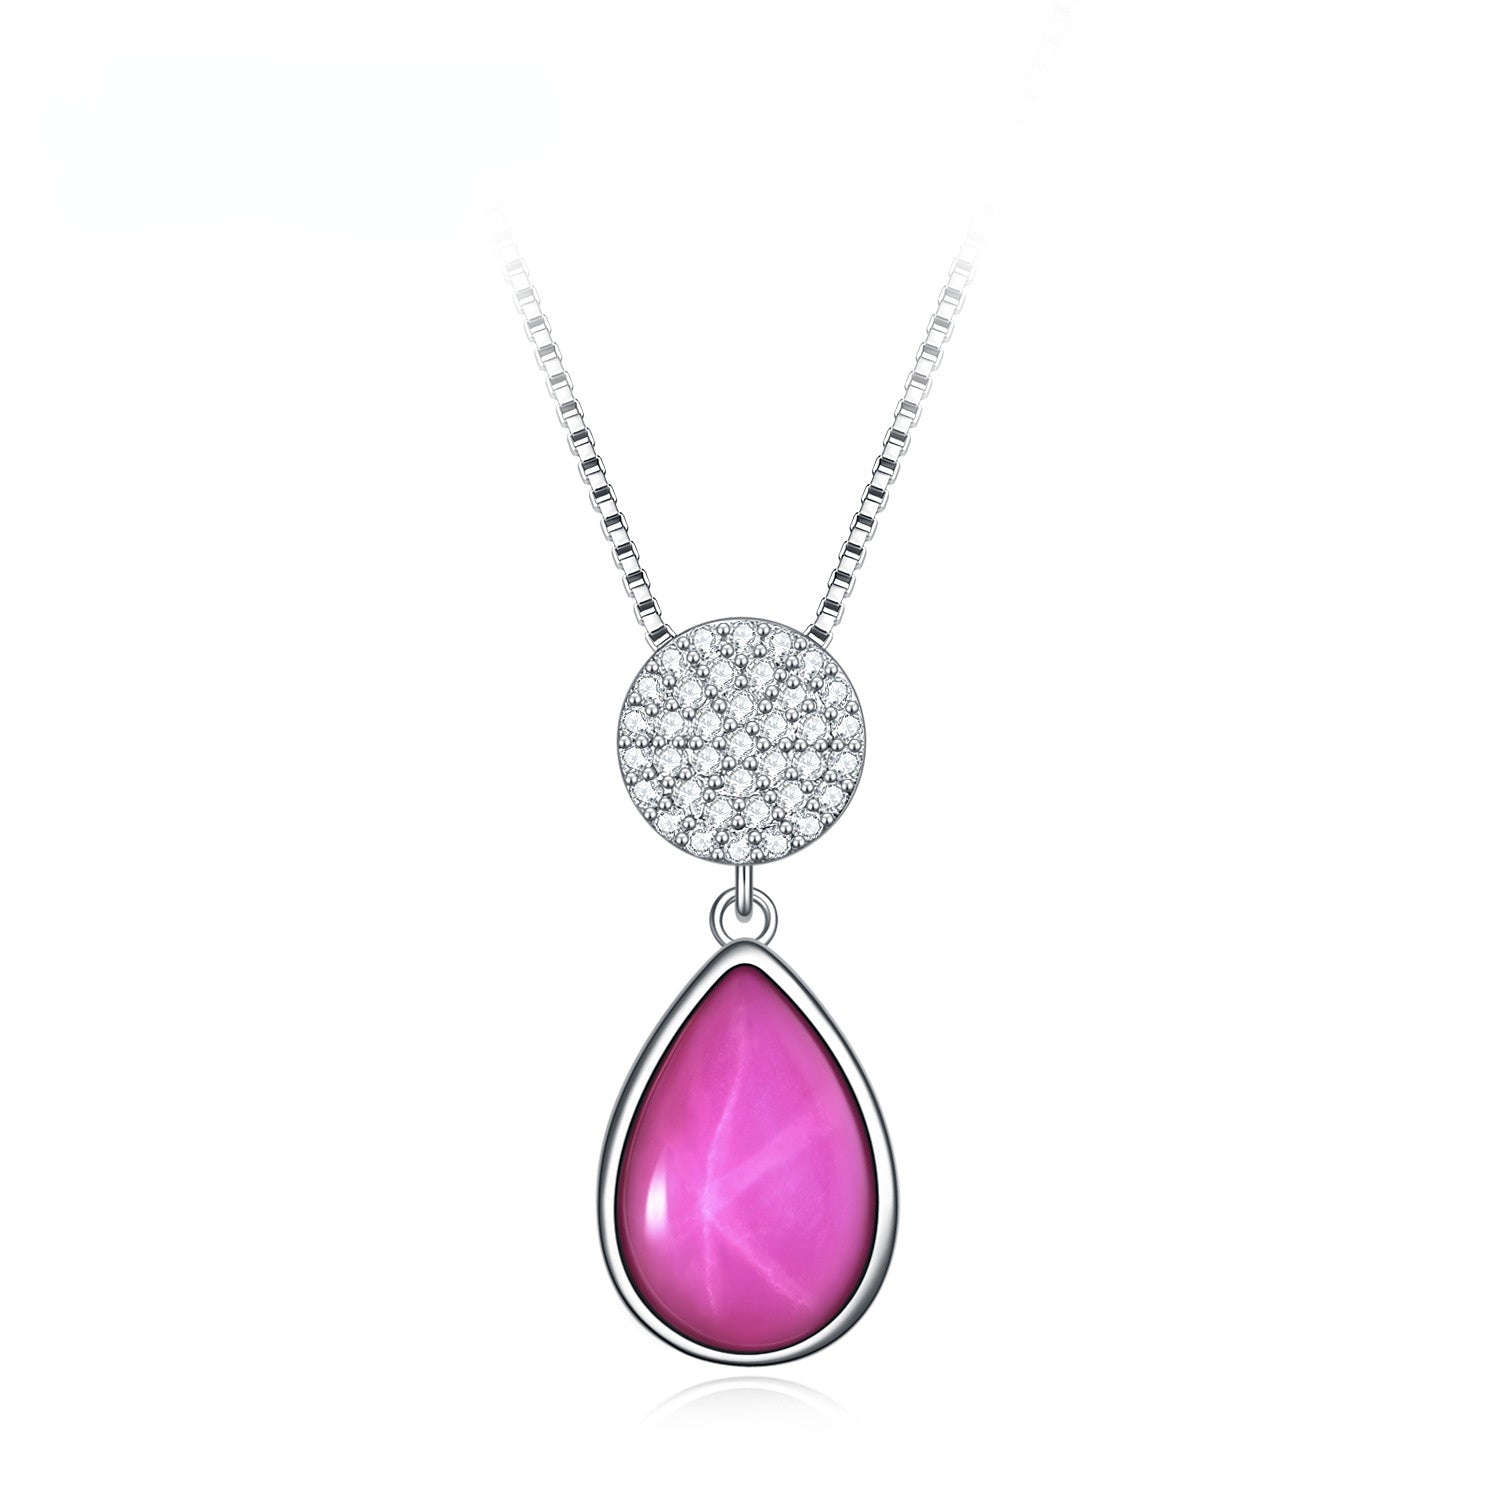 Luxury Design Six Starlight Synthetic Gemstone Pear Drop Pendant Silver Necklace for Women